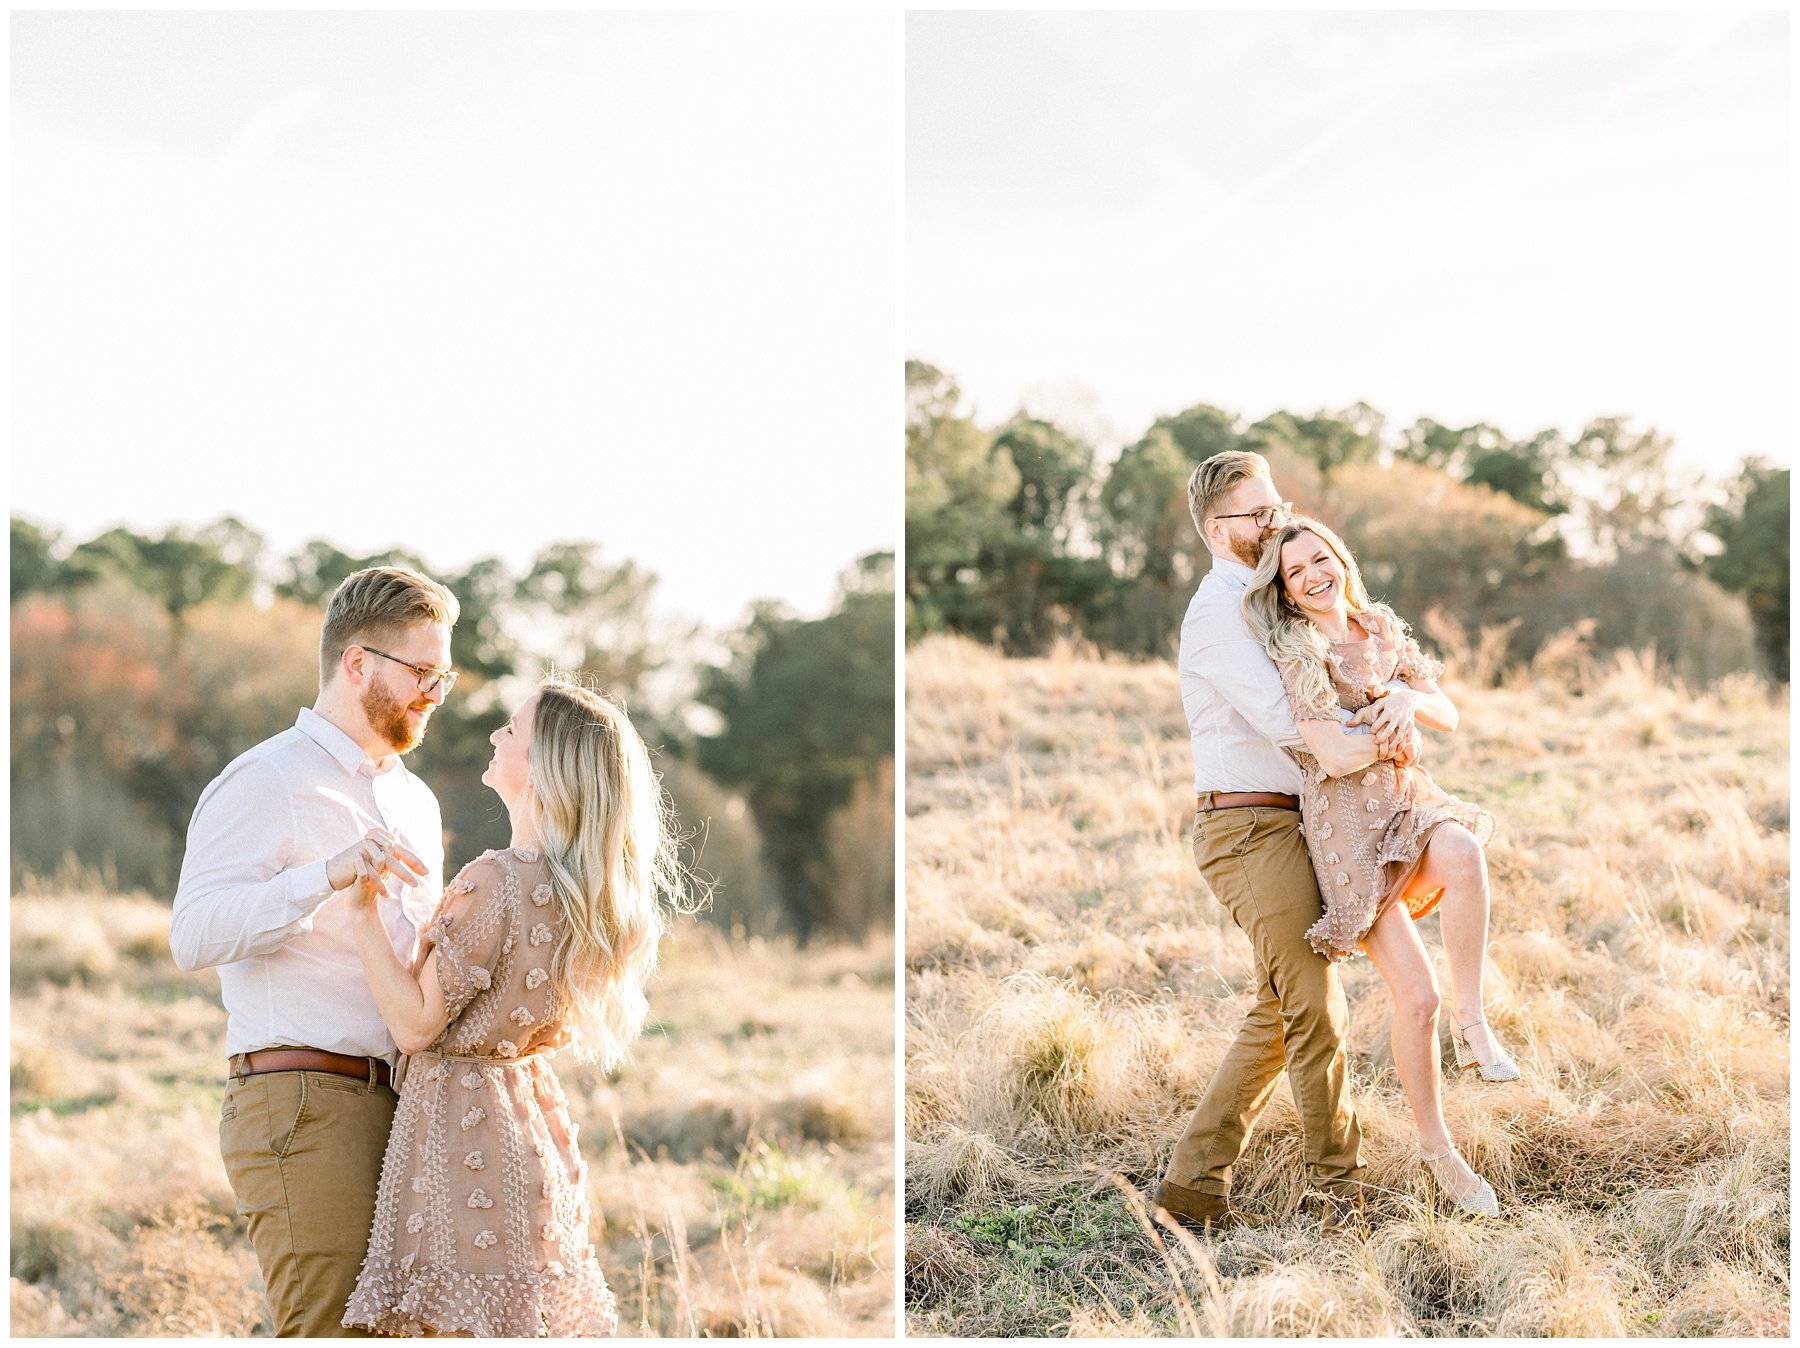 North Carolina Museum of Art Spring Engagement Session in Raleigh North Carolina. Playing in Sun soaked fields at sunset